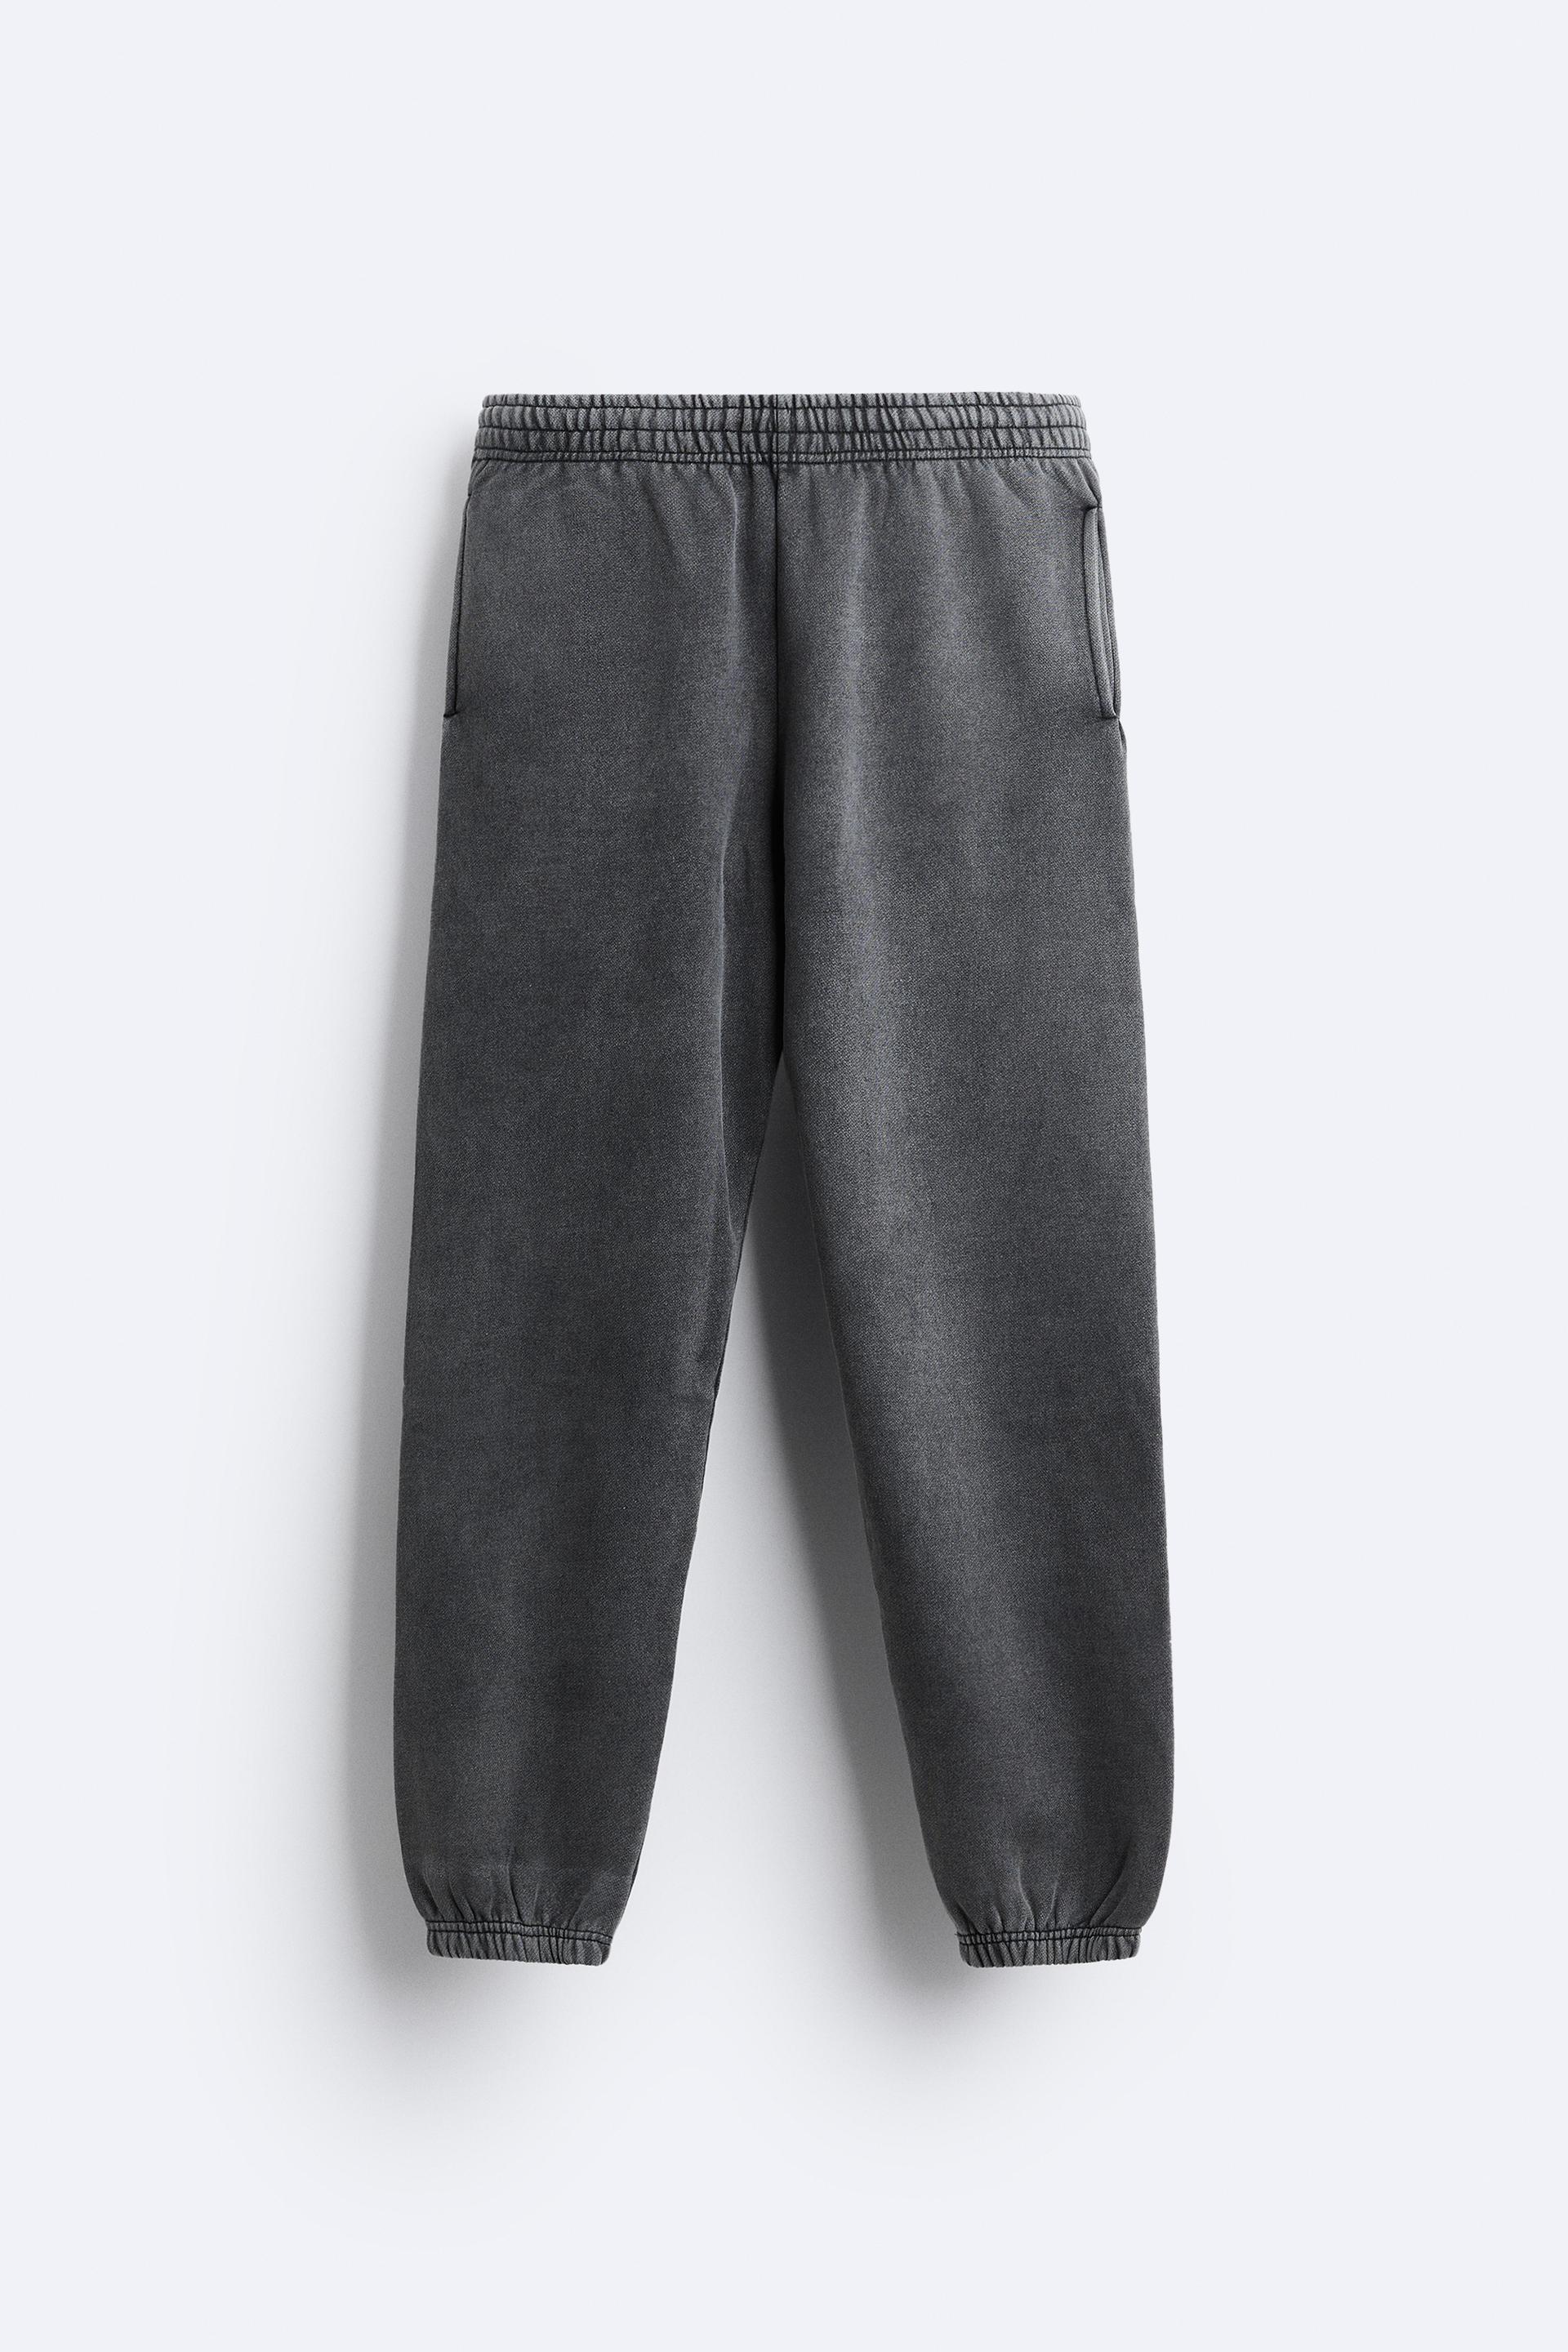 FADED JOGGERS - Anthracite grey